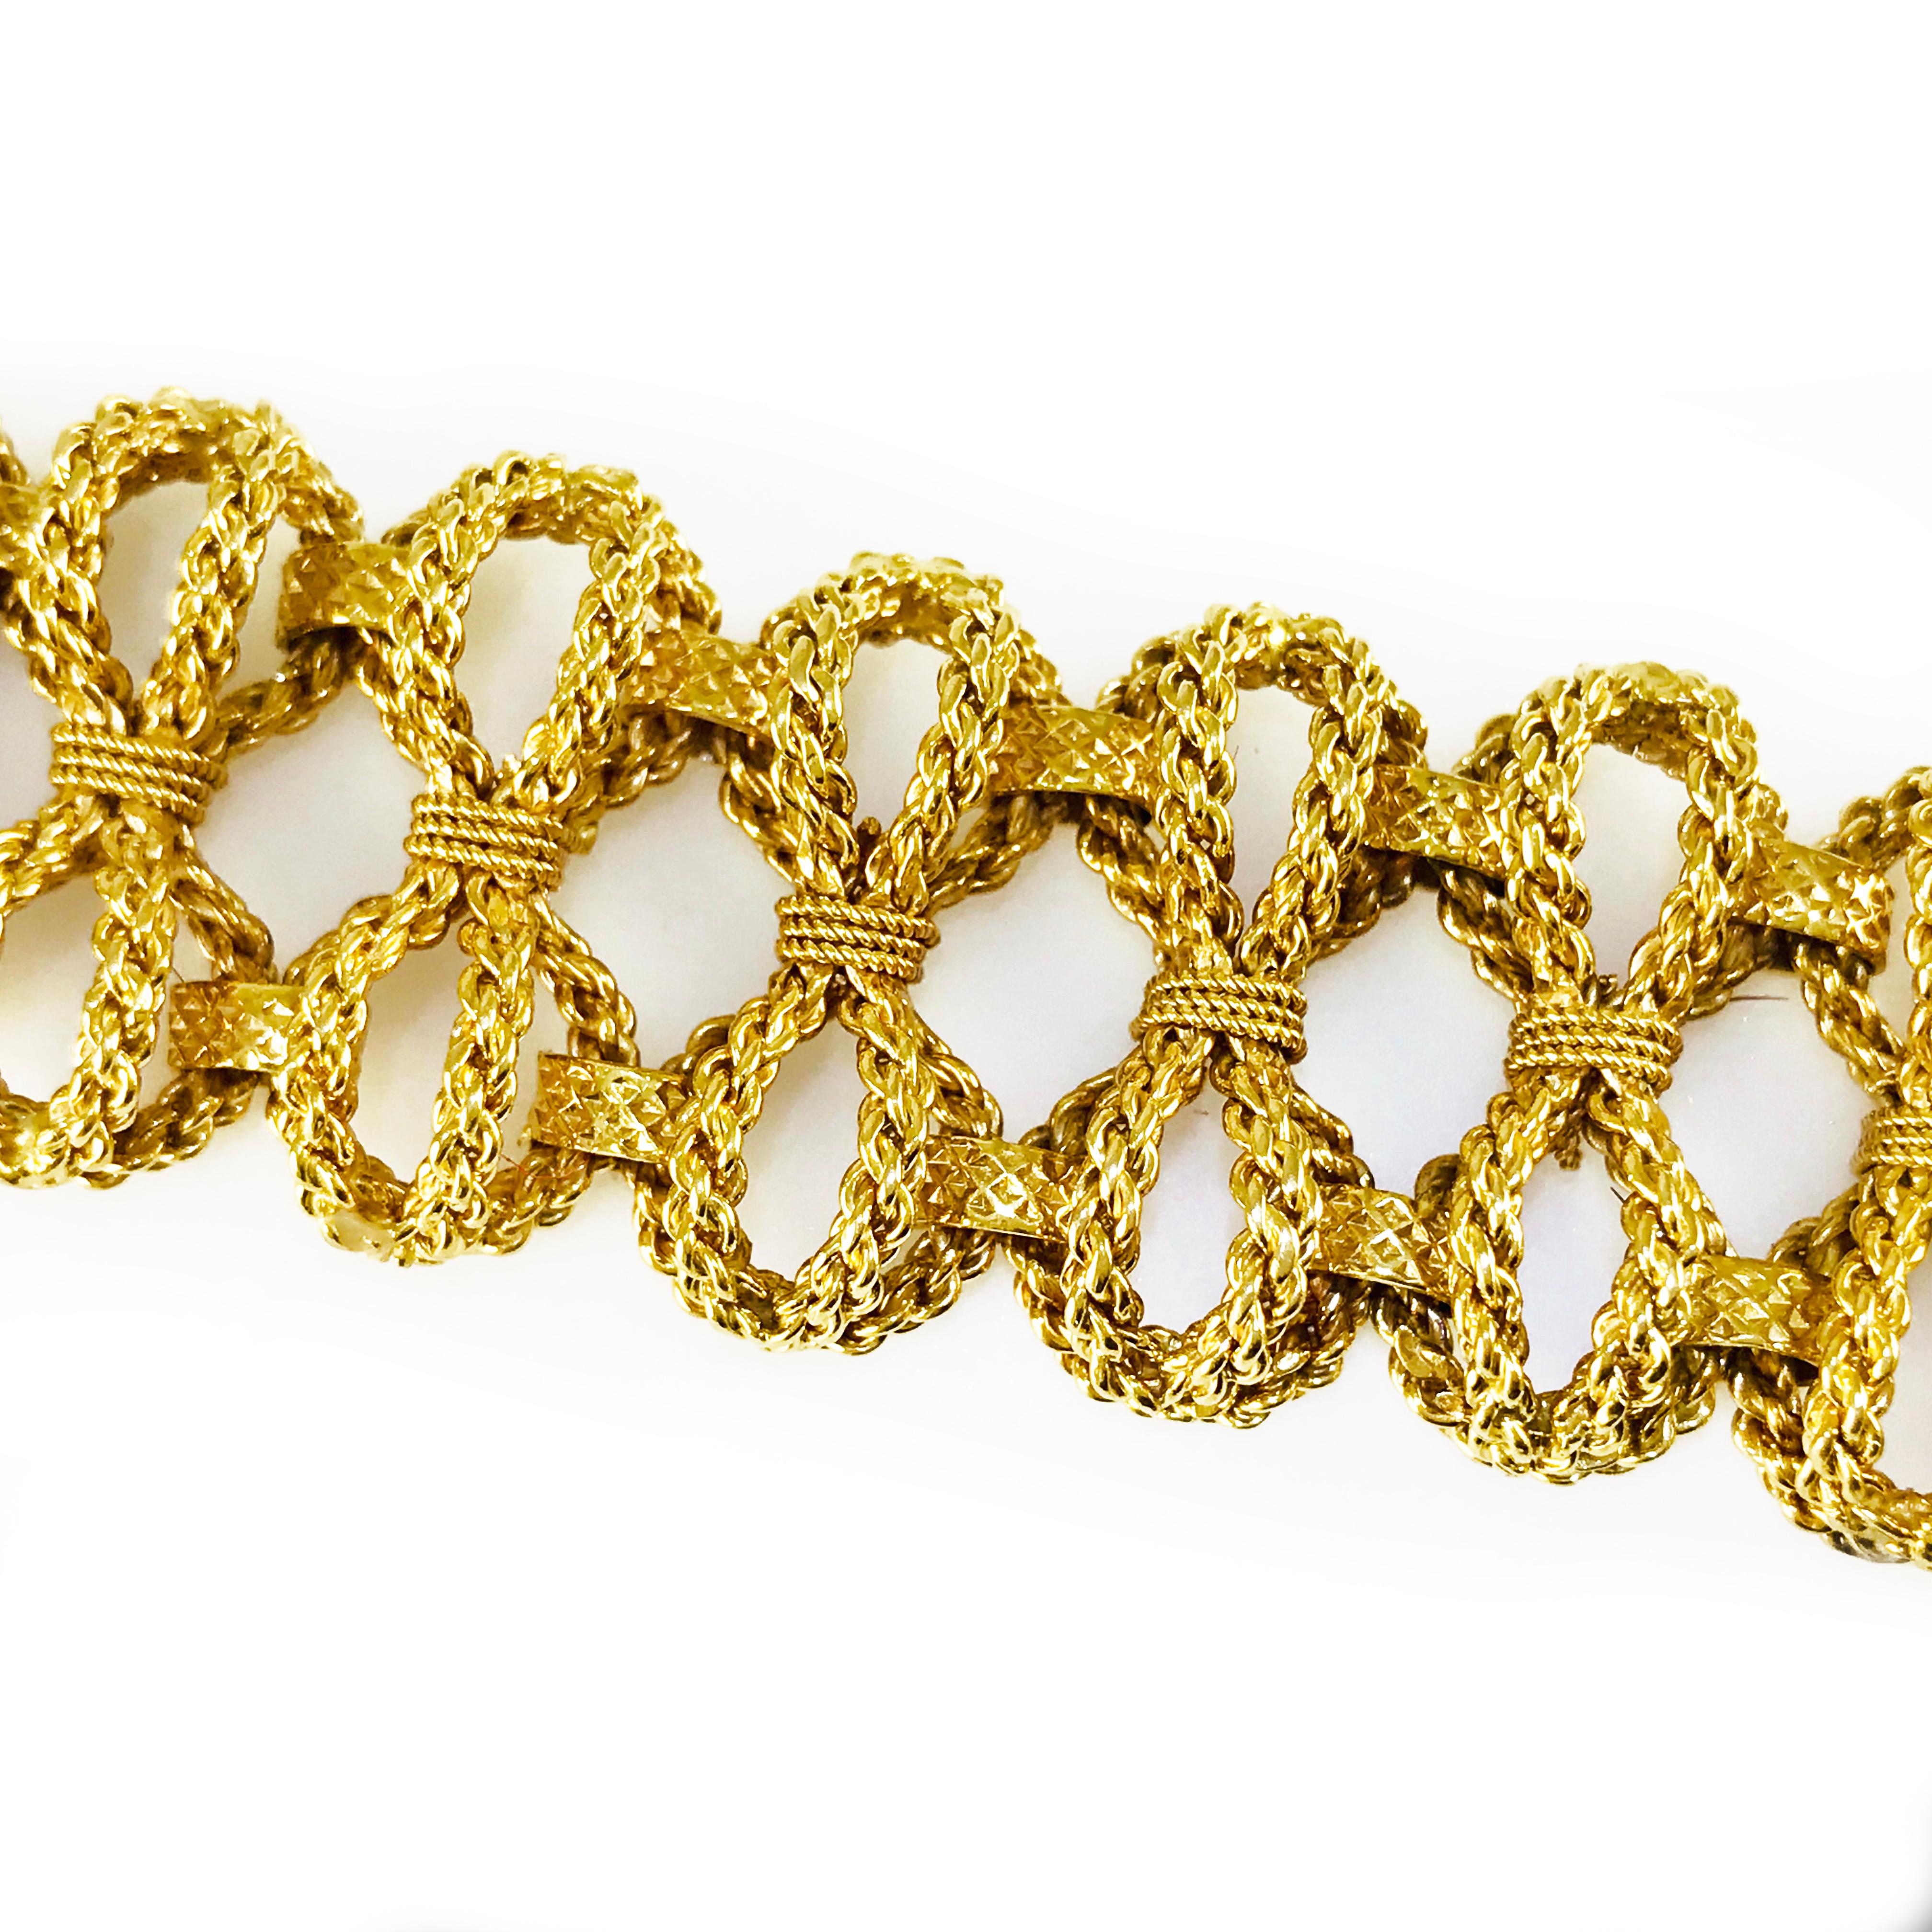 18 Karat Gold Rope-Style Bow Bracelet In Good Condition For Sale In Palm Desert, CA